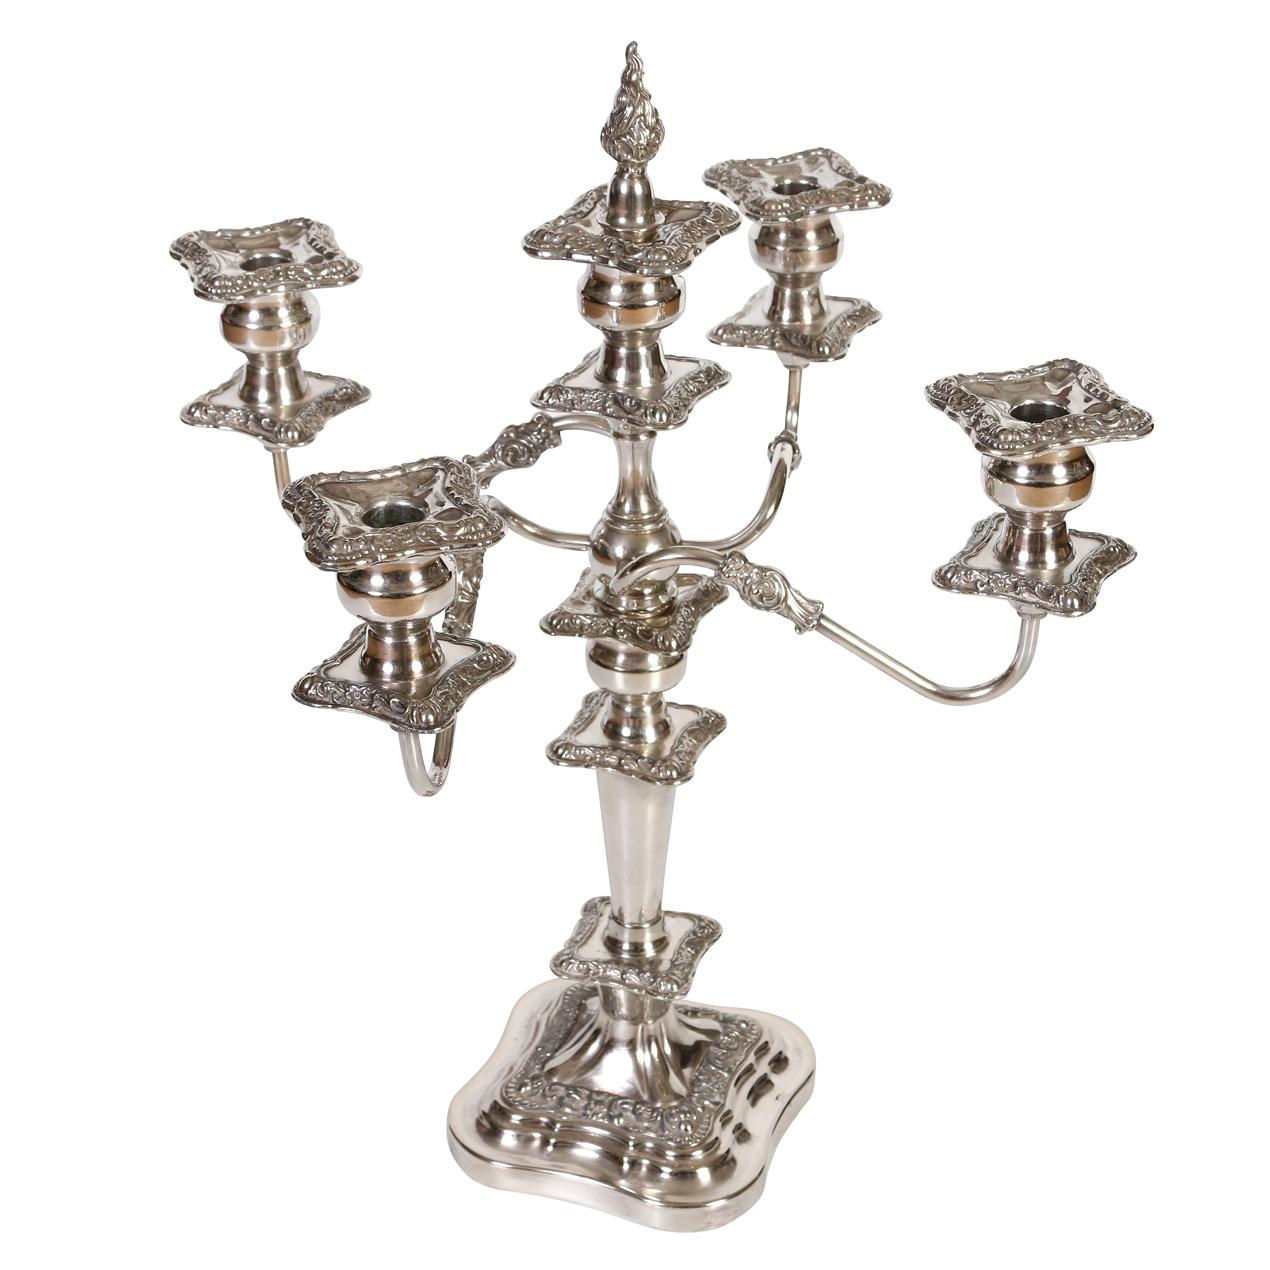 A pair of Baroque five arm silver plate weighted candelabras with detachable arms and candle drip pans and decorated with floral scroll repousse designs. Each arm of the heavy silver candelabra holds a removable drip pan for the candle.  The four